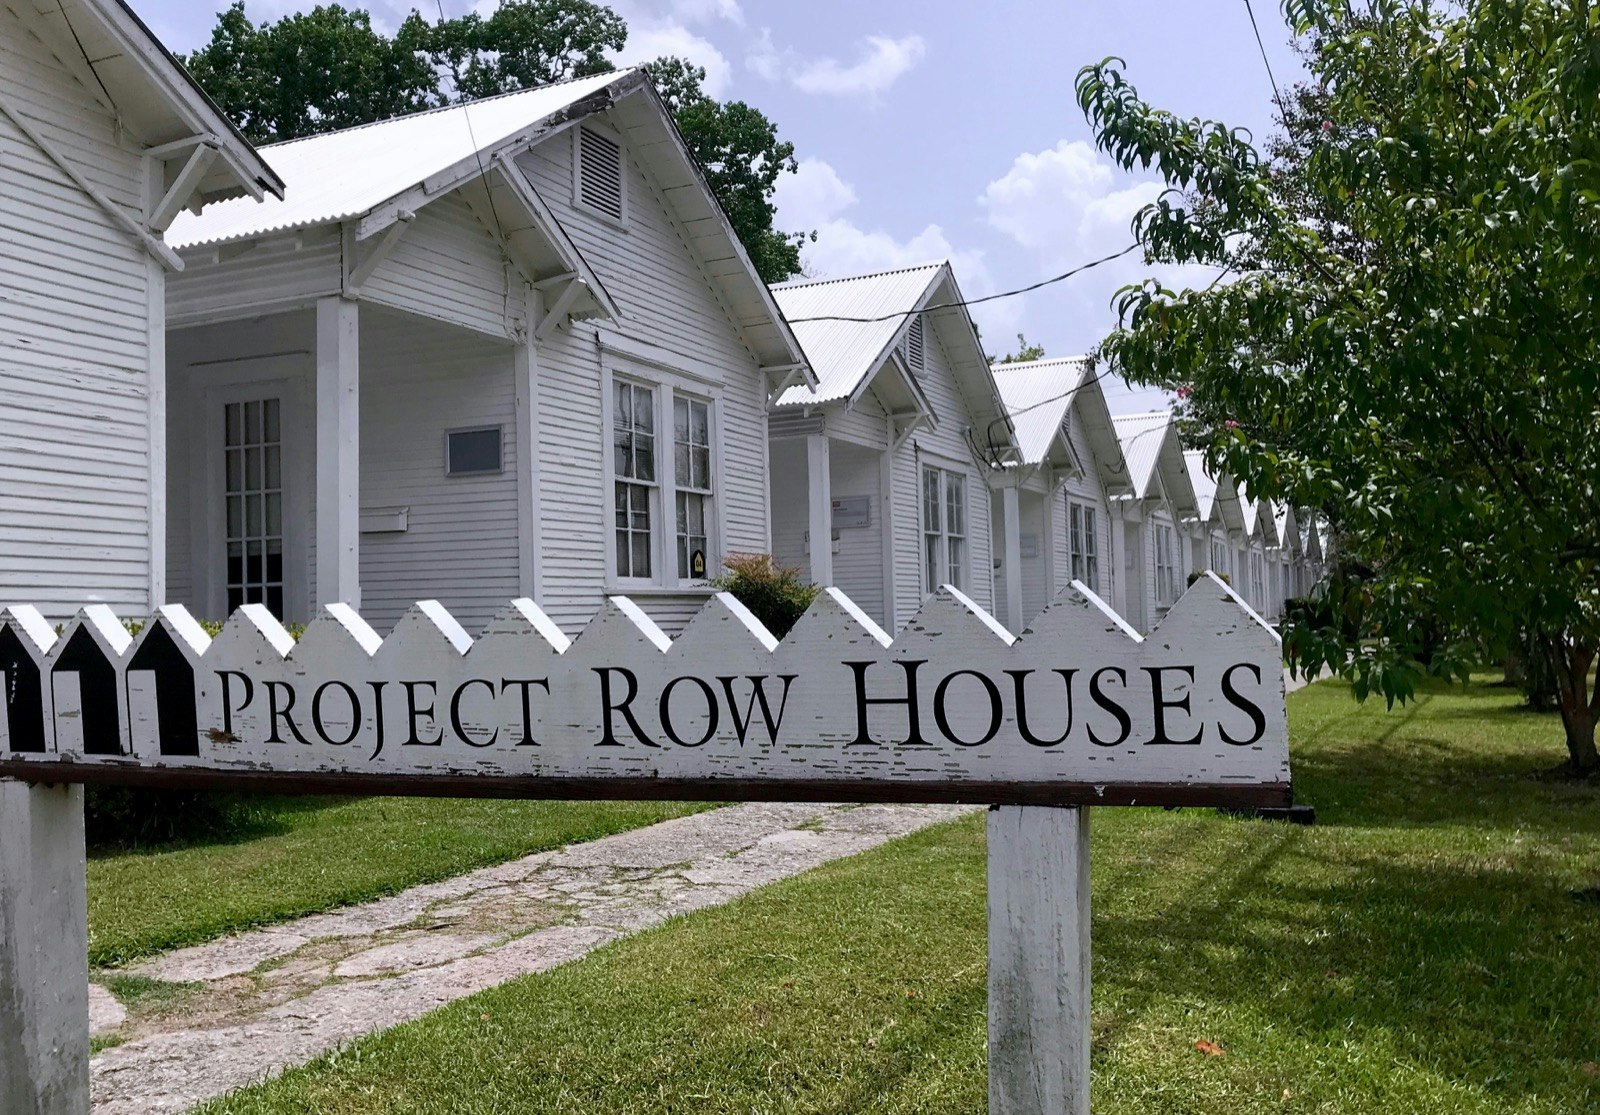 A line of identical small white-painted houses, with a sidewalk in front, is framed by a sign that reads 'Project Row Houses' © Lisa Dunford / Lonely Planet